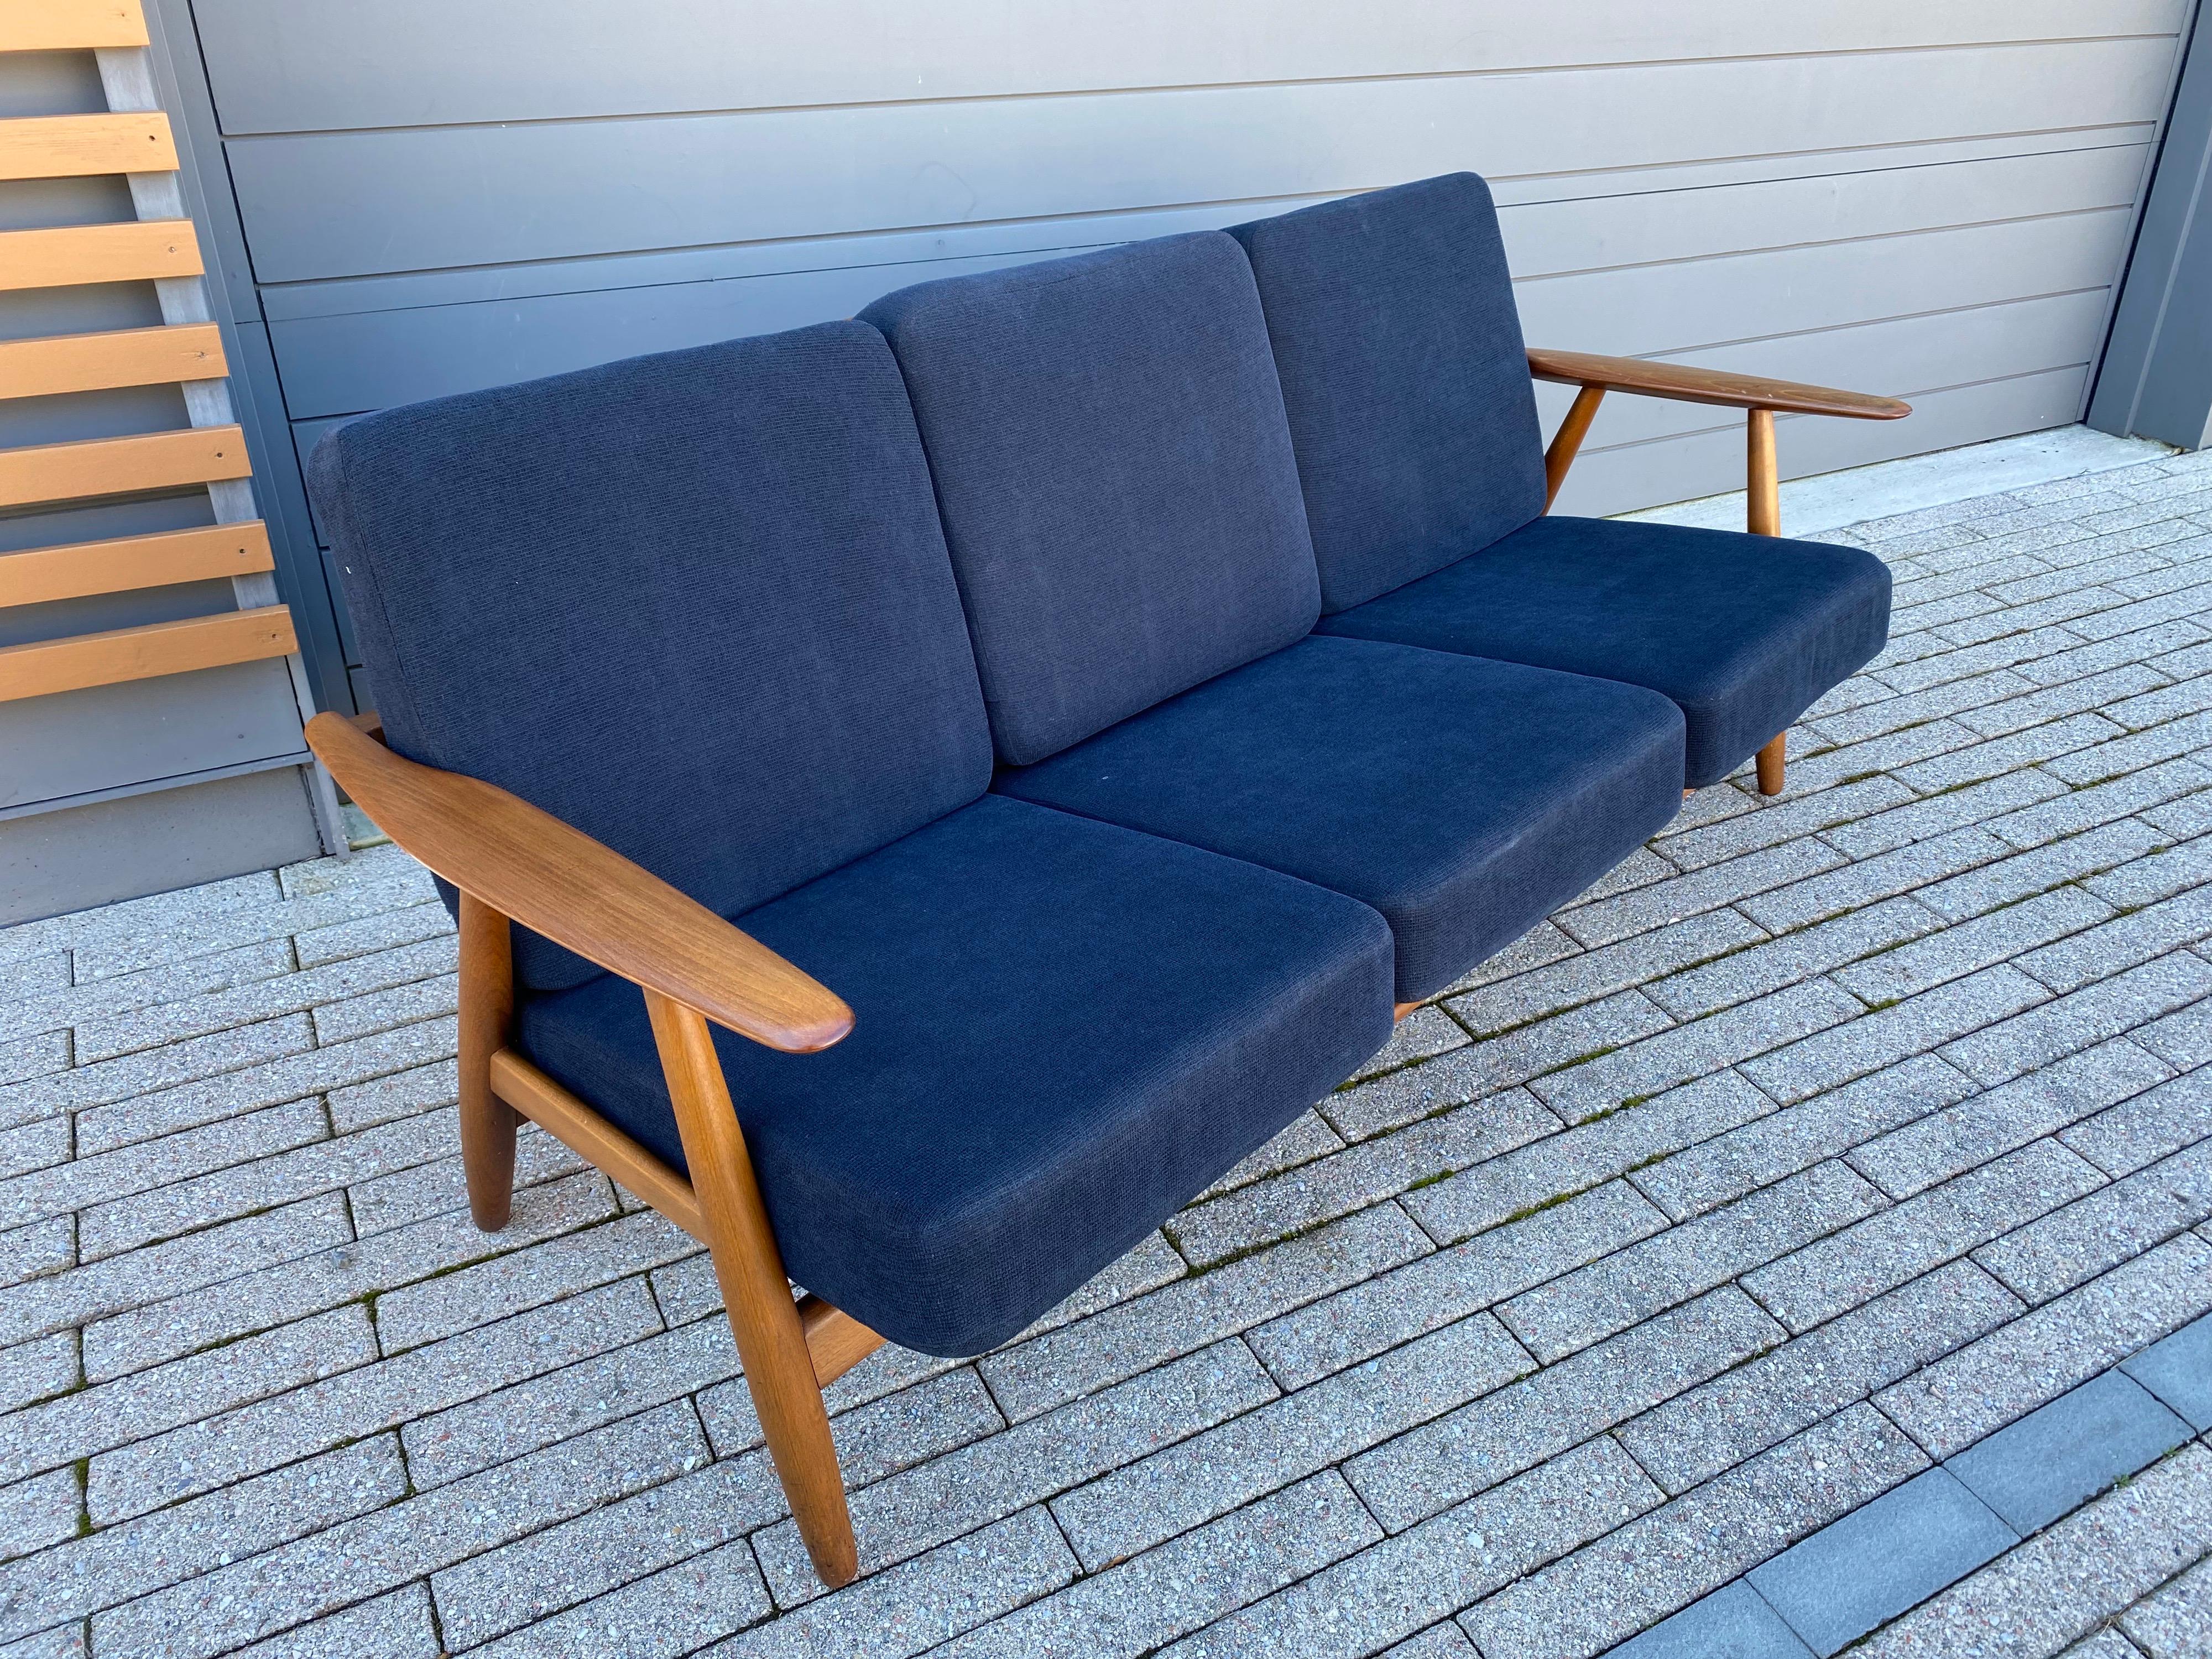 Hans Wegner for GETAMA GE-240 3 seat sofa. Oak body with teak arms. Redone about 13 years ago but retaining it's original inner coil springs. I have 2 of these sofas available. One has had the arms refinished in a shinier sheen, as seen in photos.